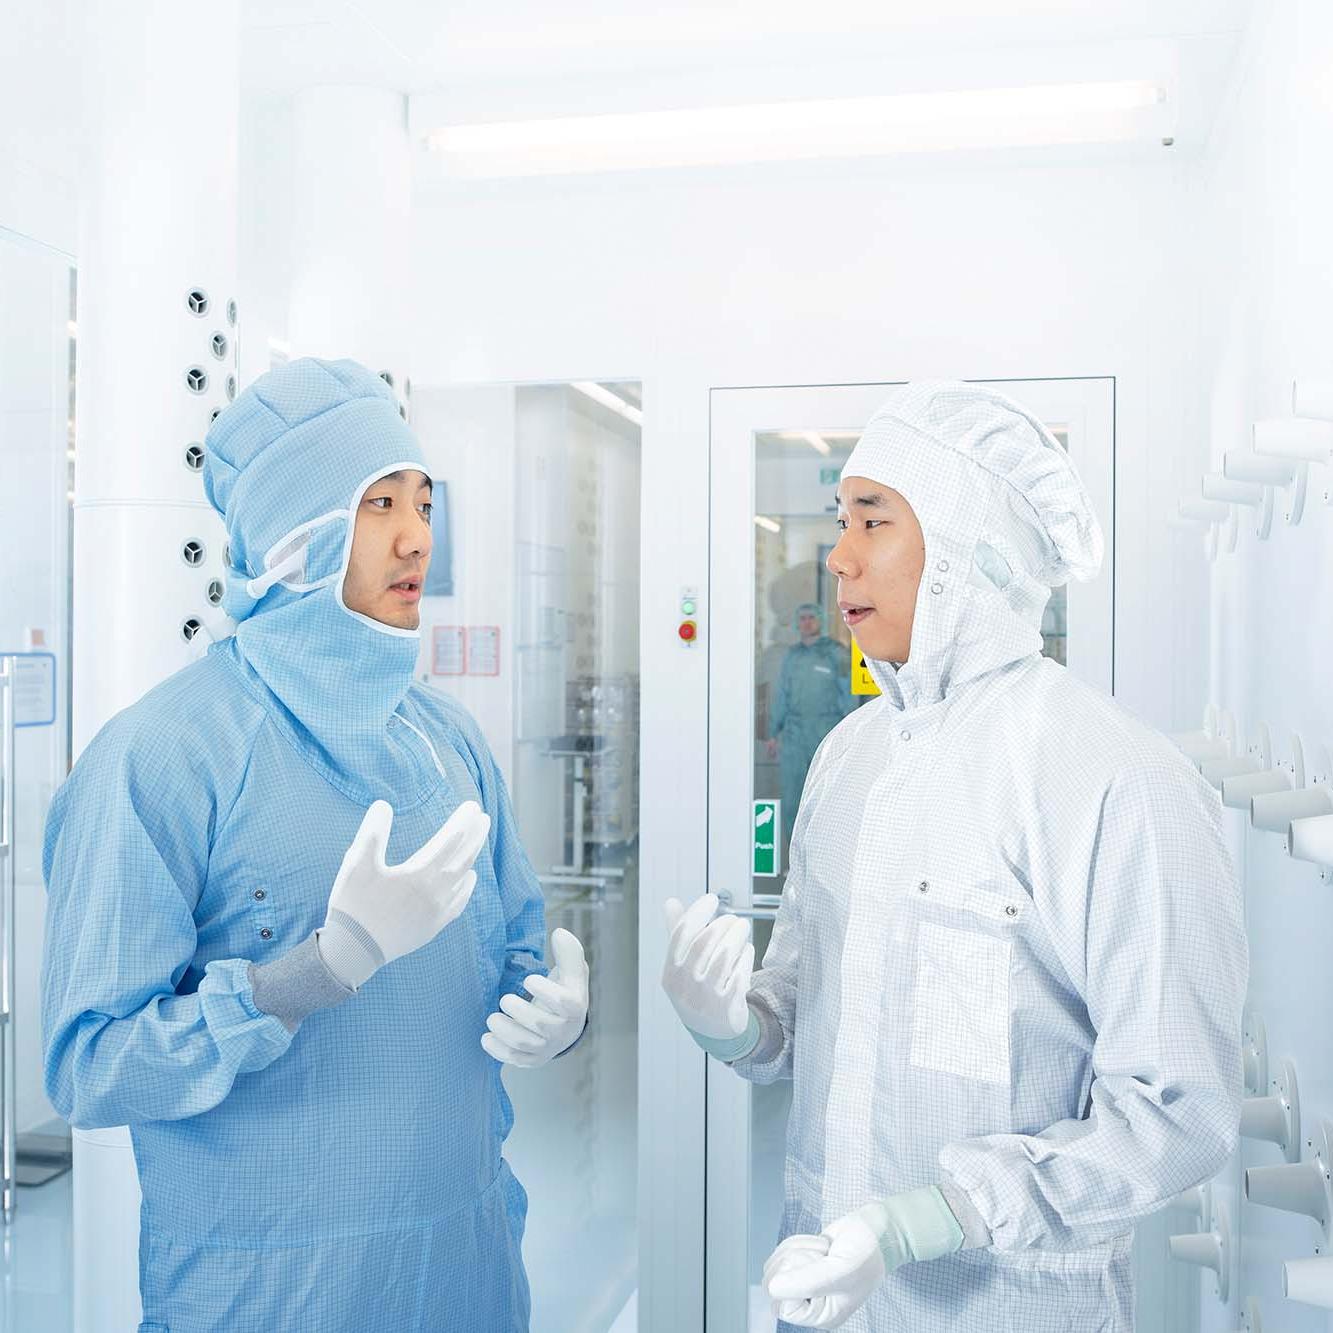 Two employees from the SMT Process Control Solutions segment chat in the ZEISS SMT clean room